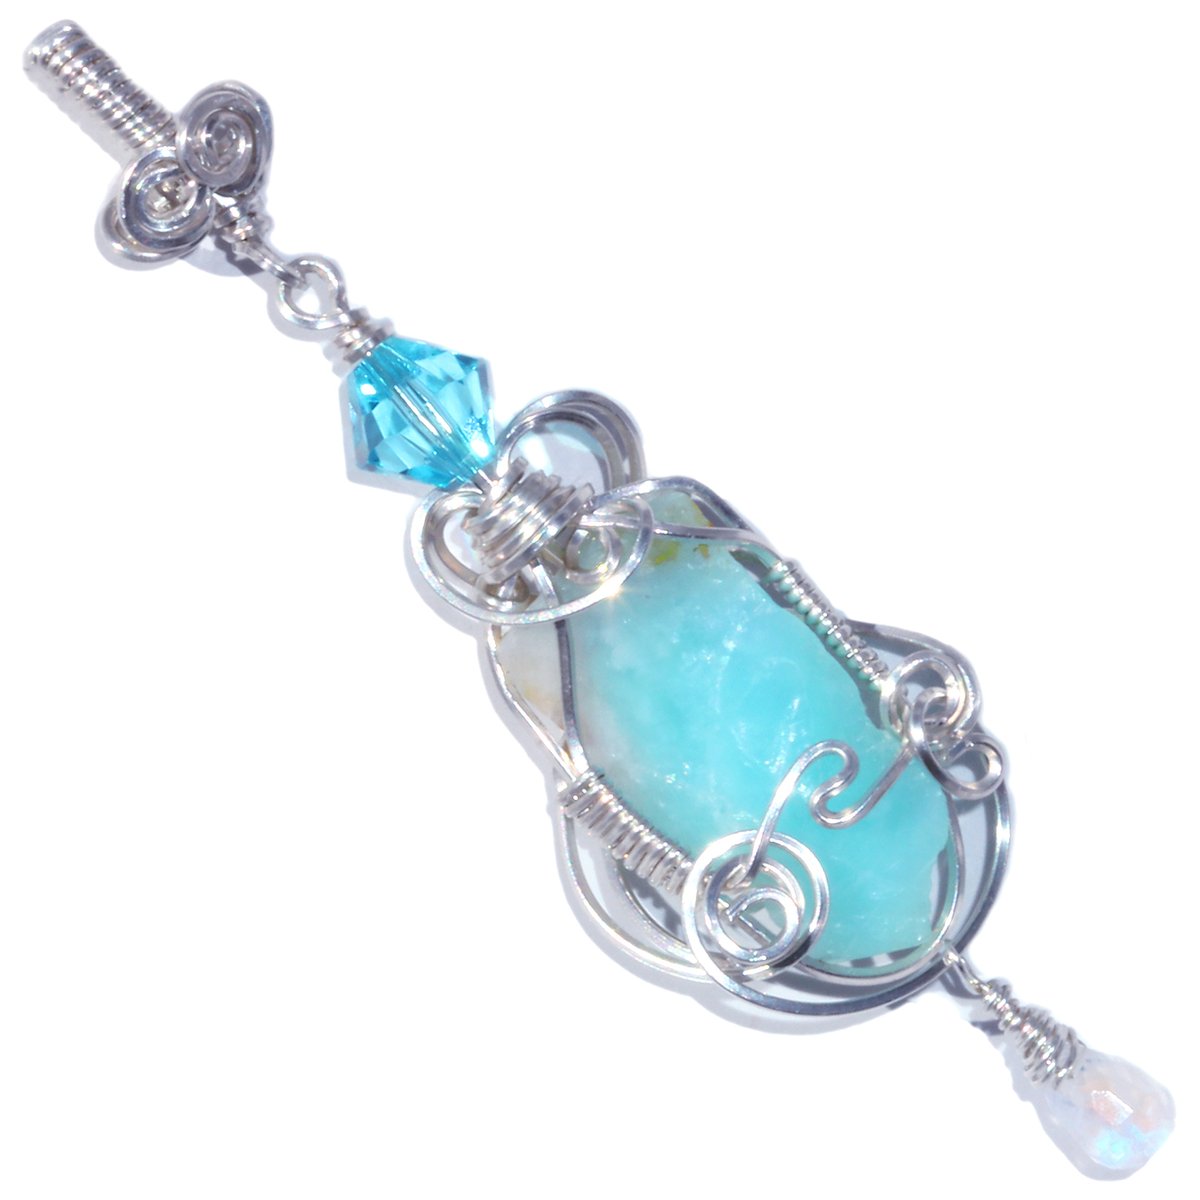 Rough Peruvian Blue Opal Pendant with Moonstone